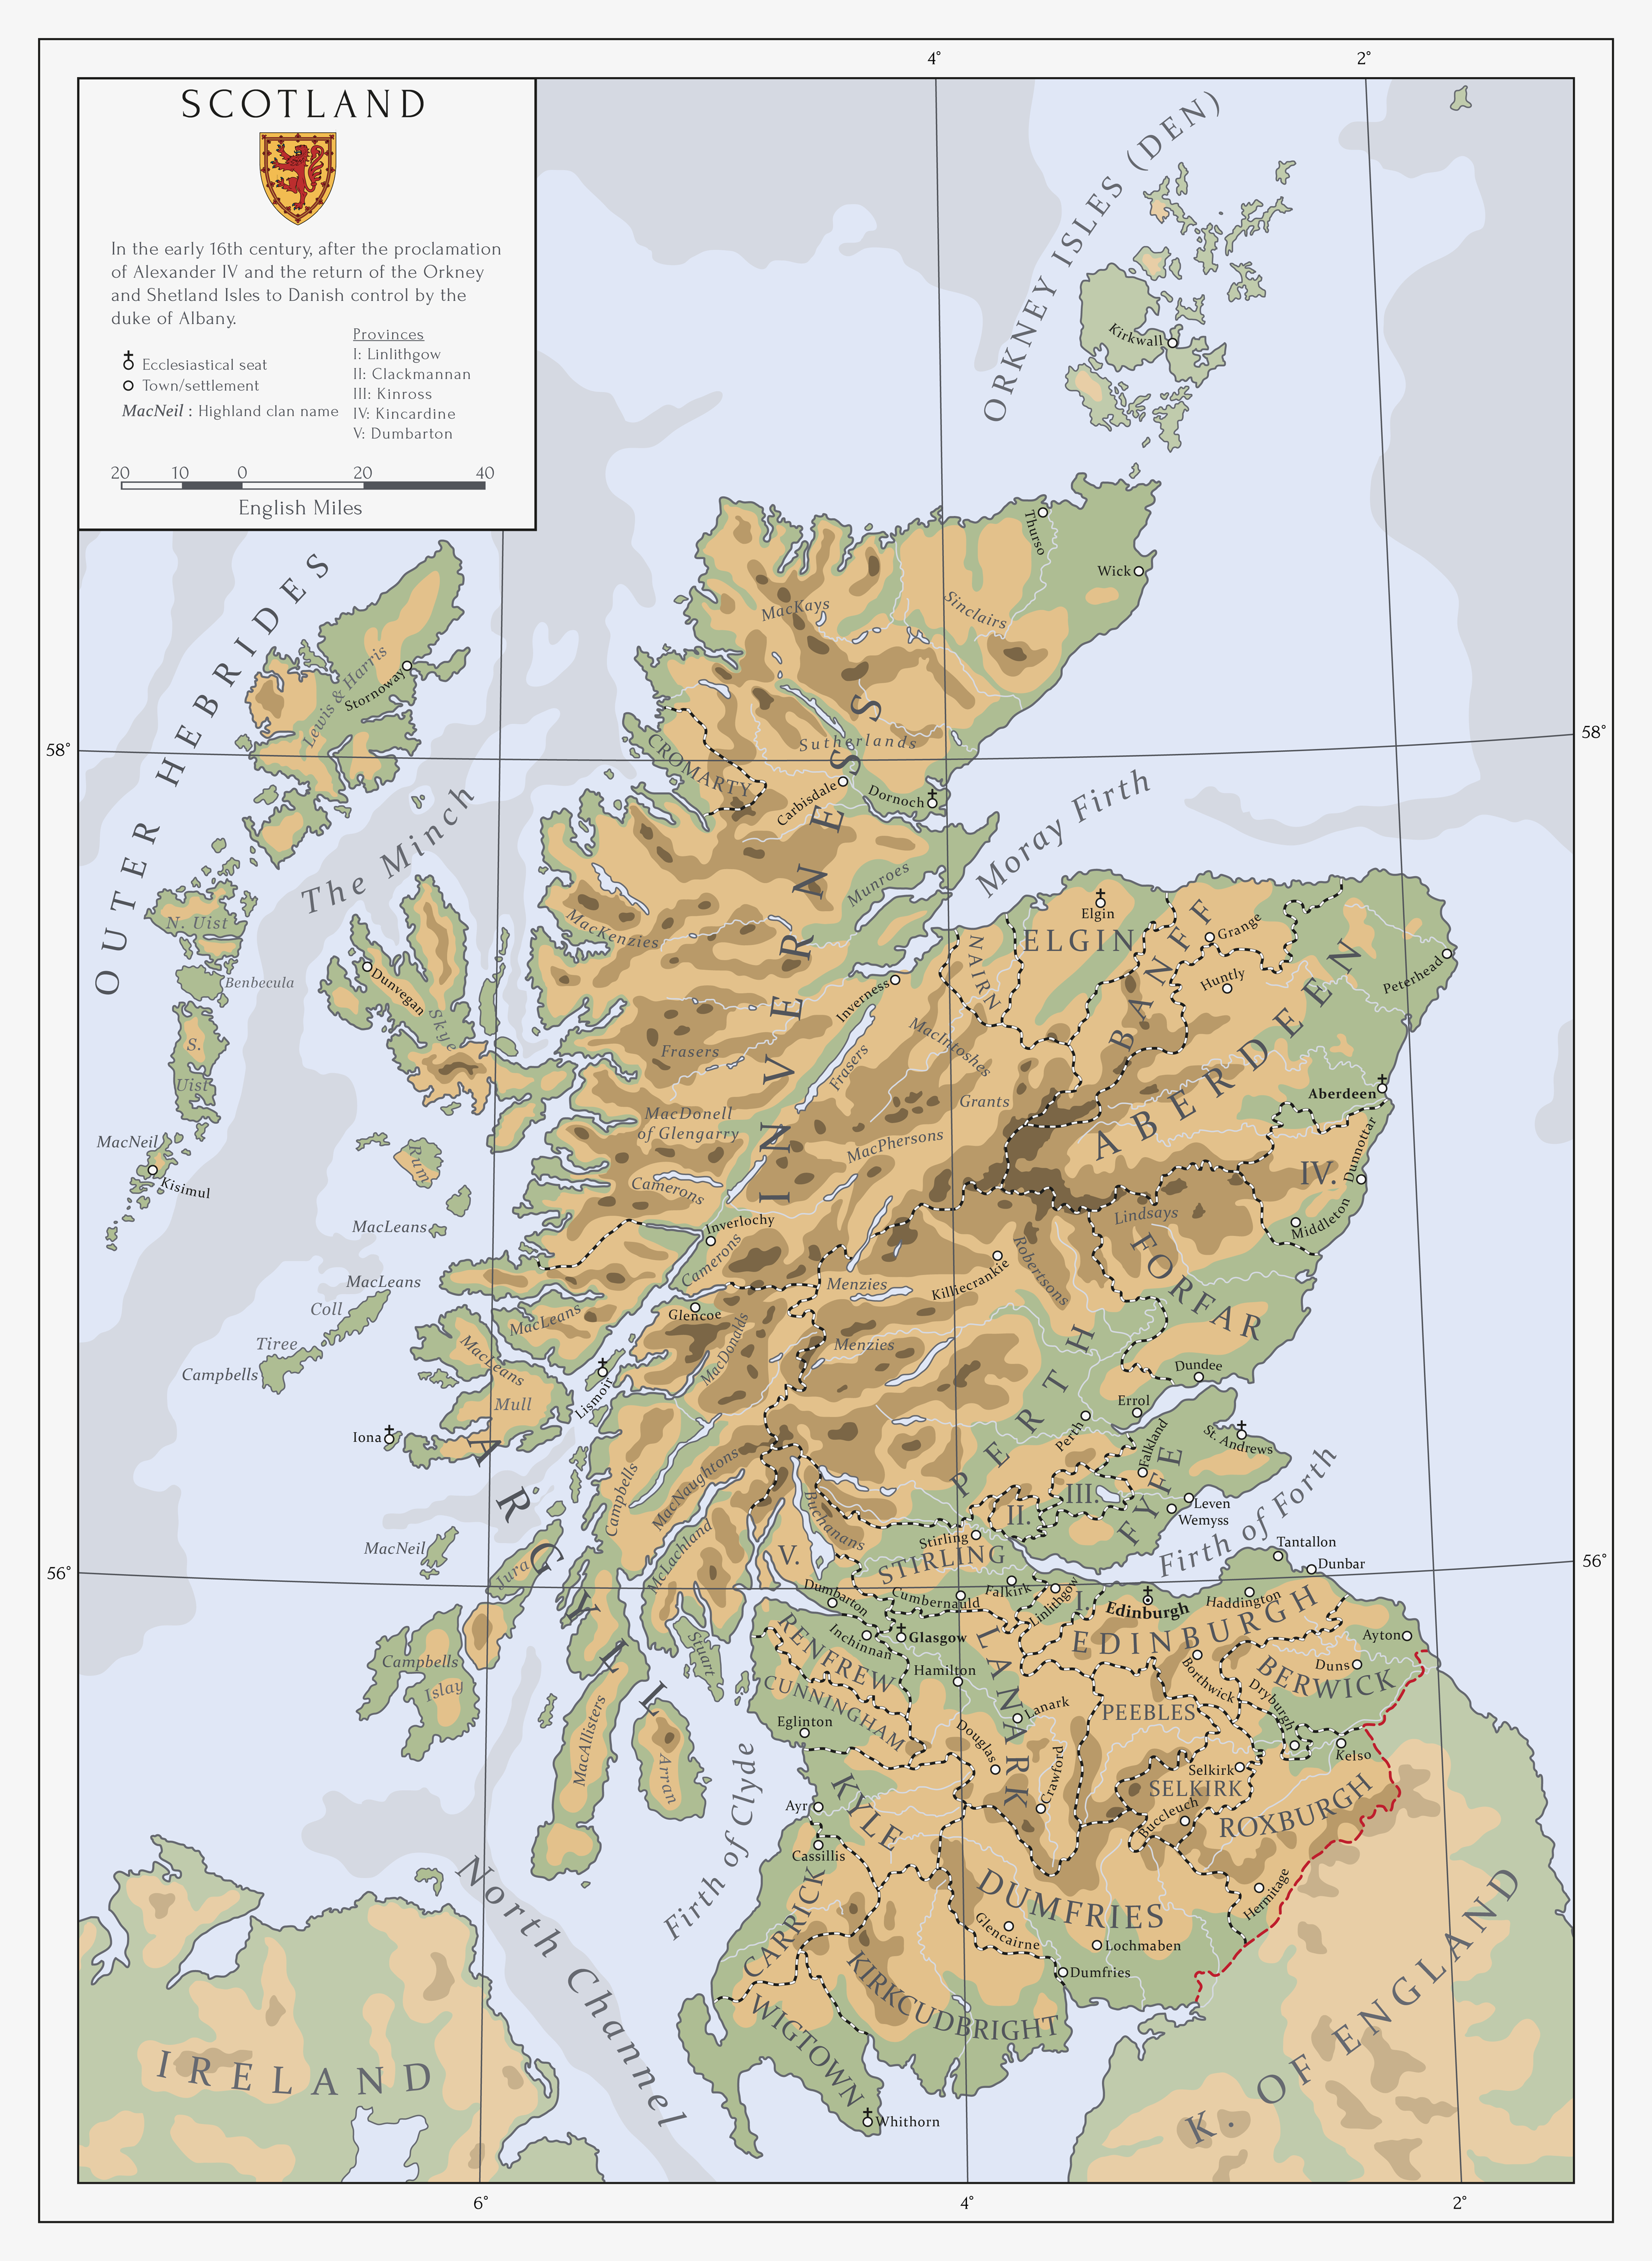 scotland_in_the_early_16th_century_by_milites_atterdag-dc7uxzr.png